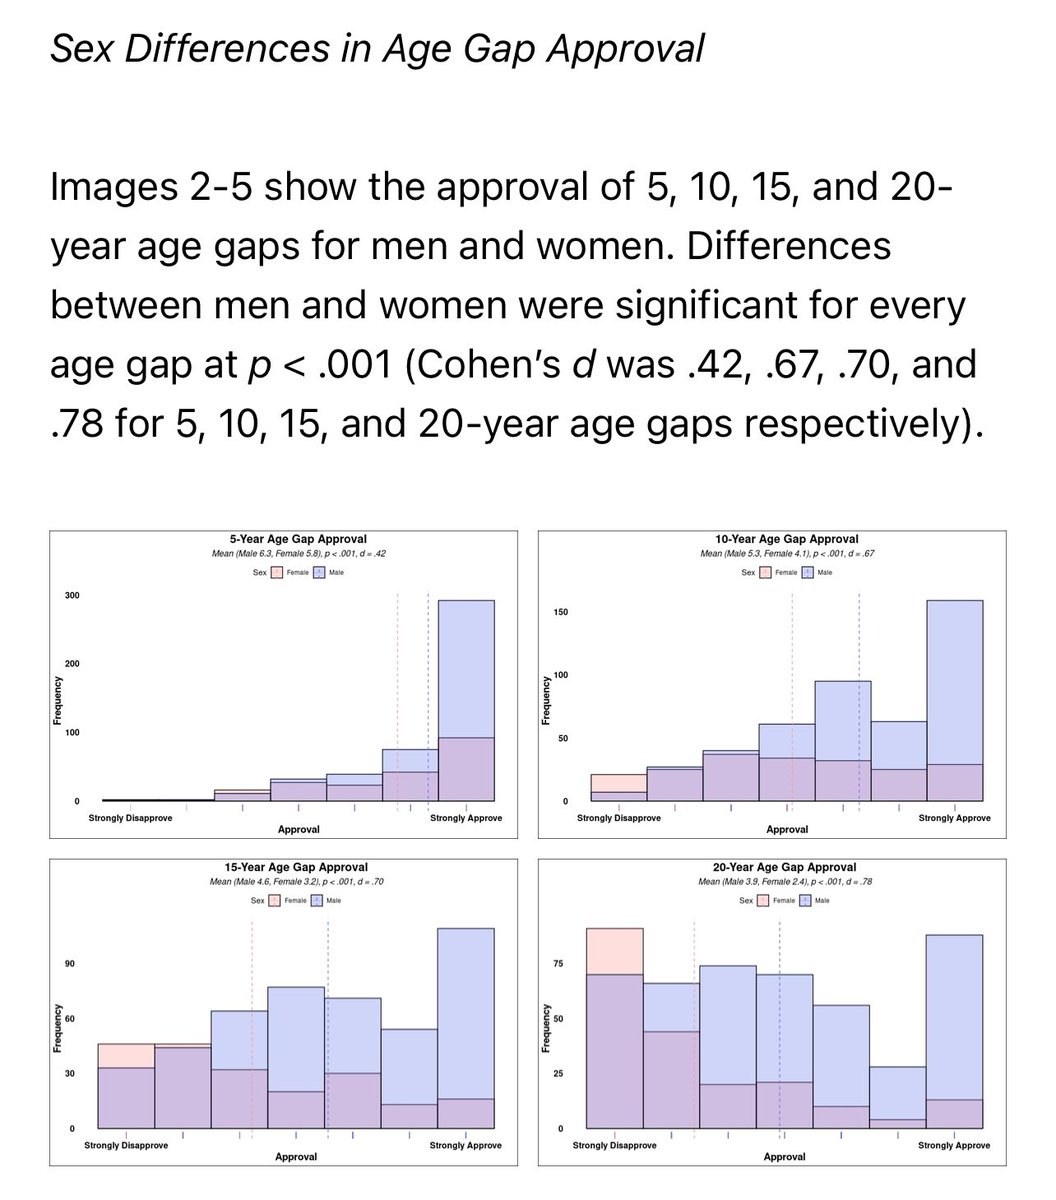 Do older women dislike age gap relationships more? Is this intrasexual competition? Replicating my results from over one year ago - I found no association between age and approval of age gap relationships for women. Also replicating past year’s finding - men who were older…